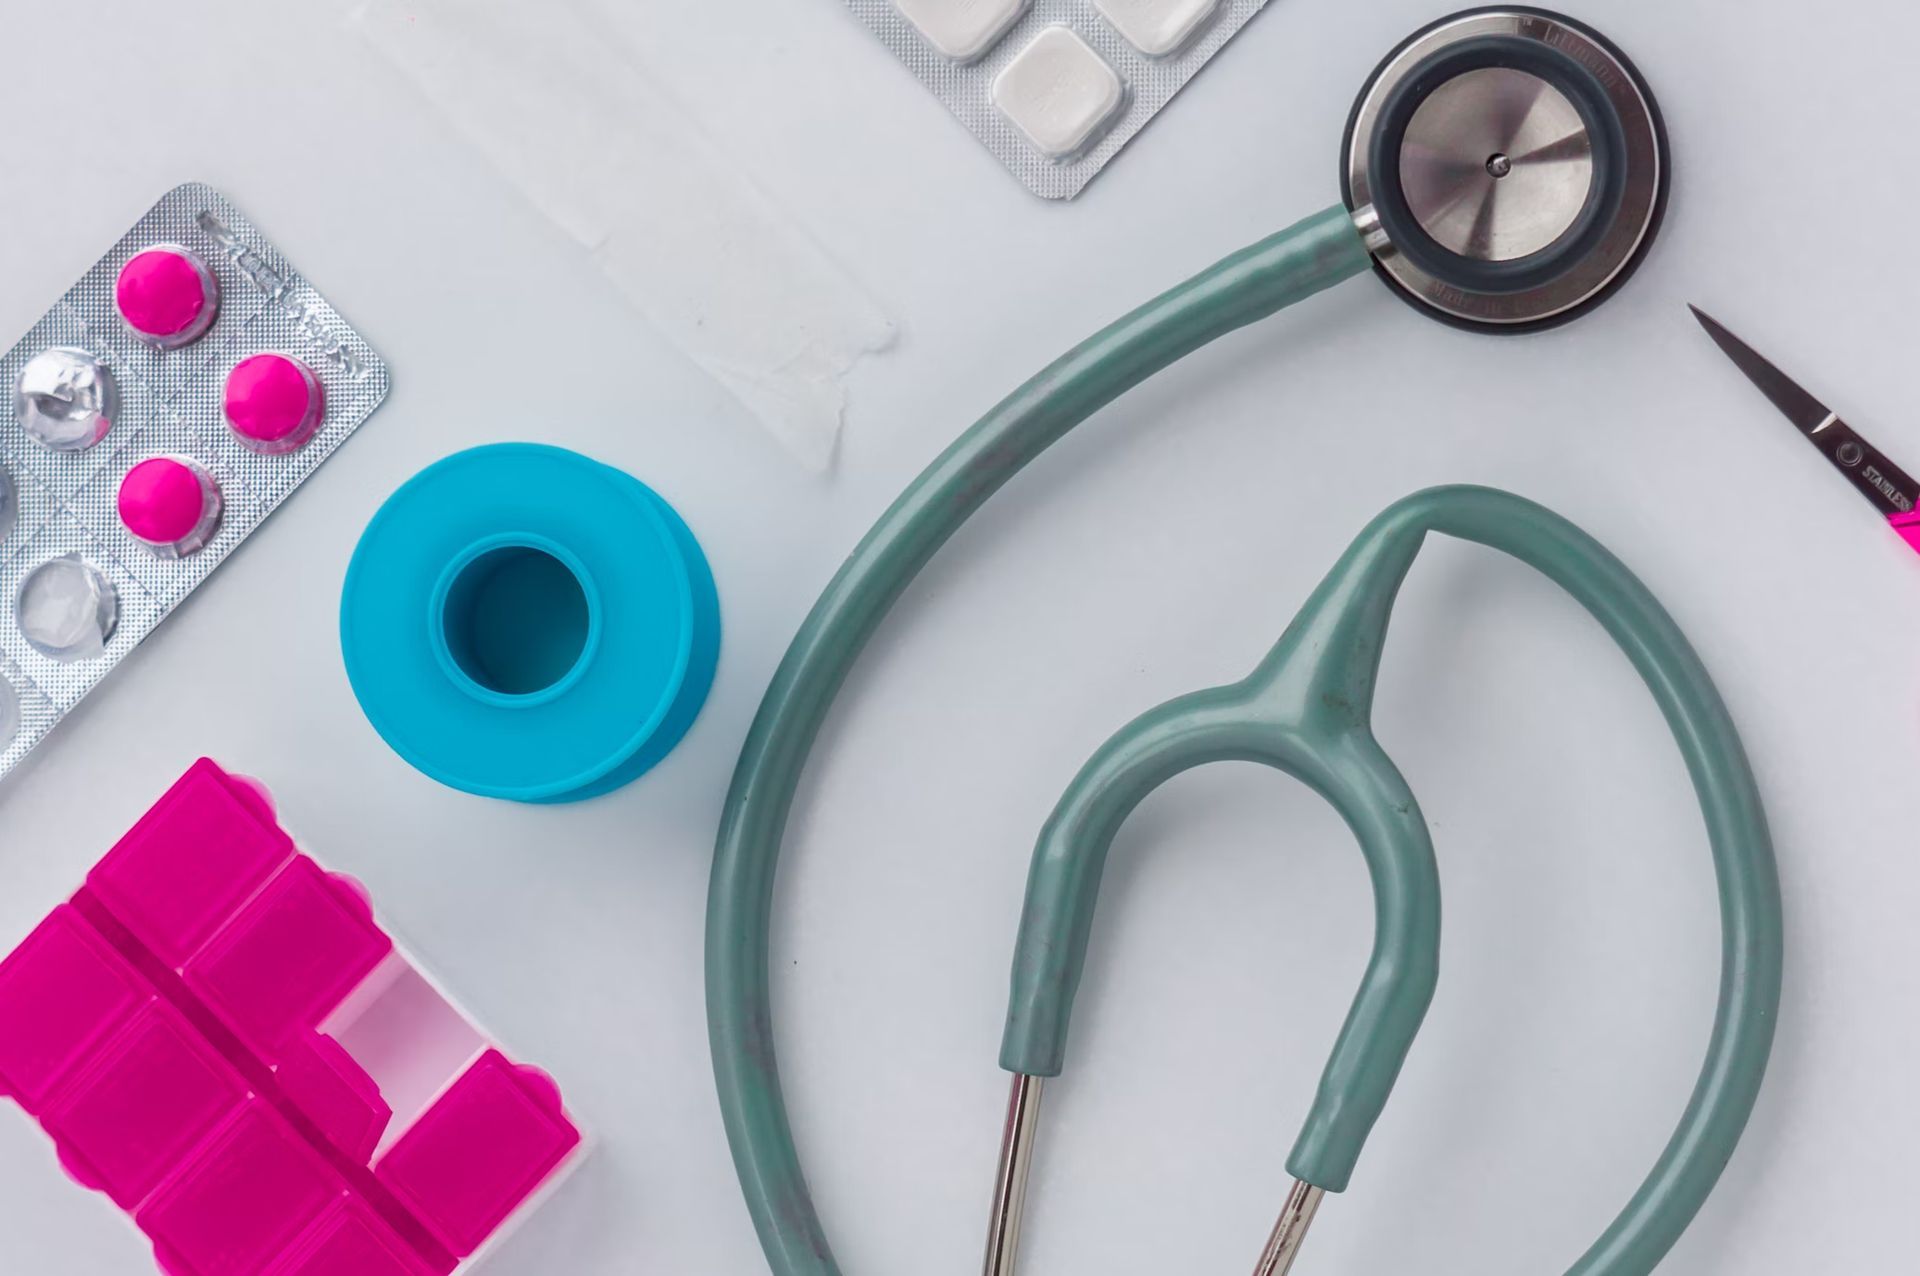 Medical website SEO strategies: Tips, tools and more